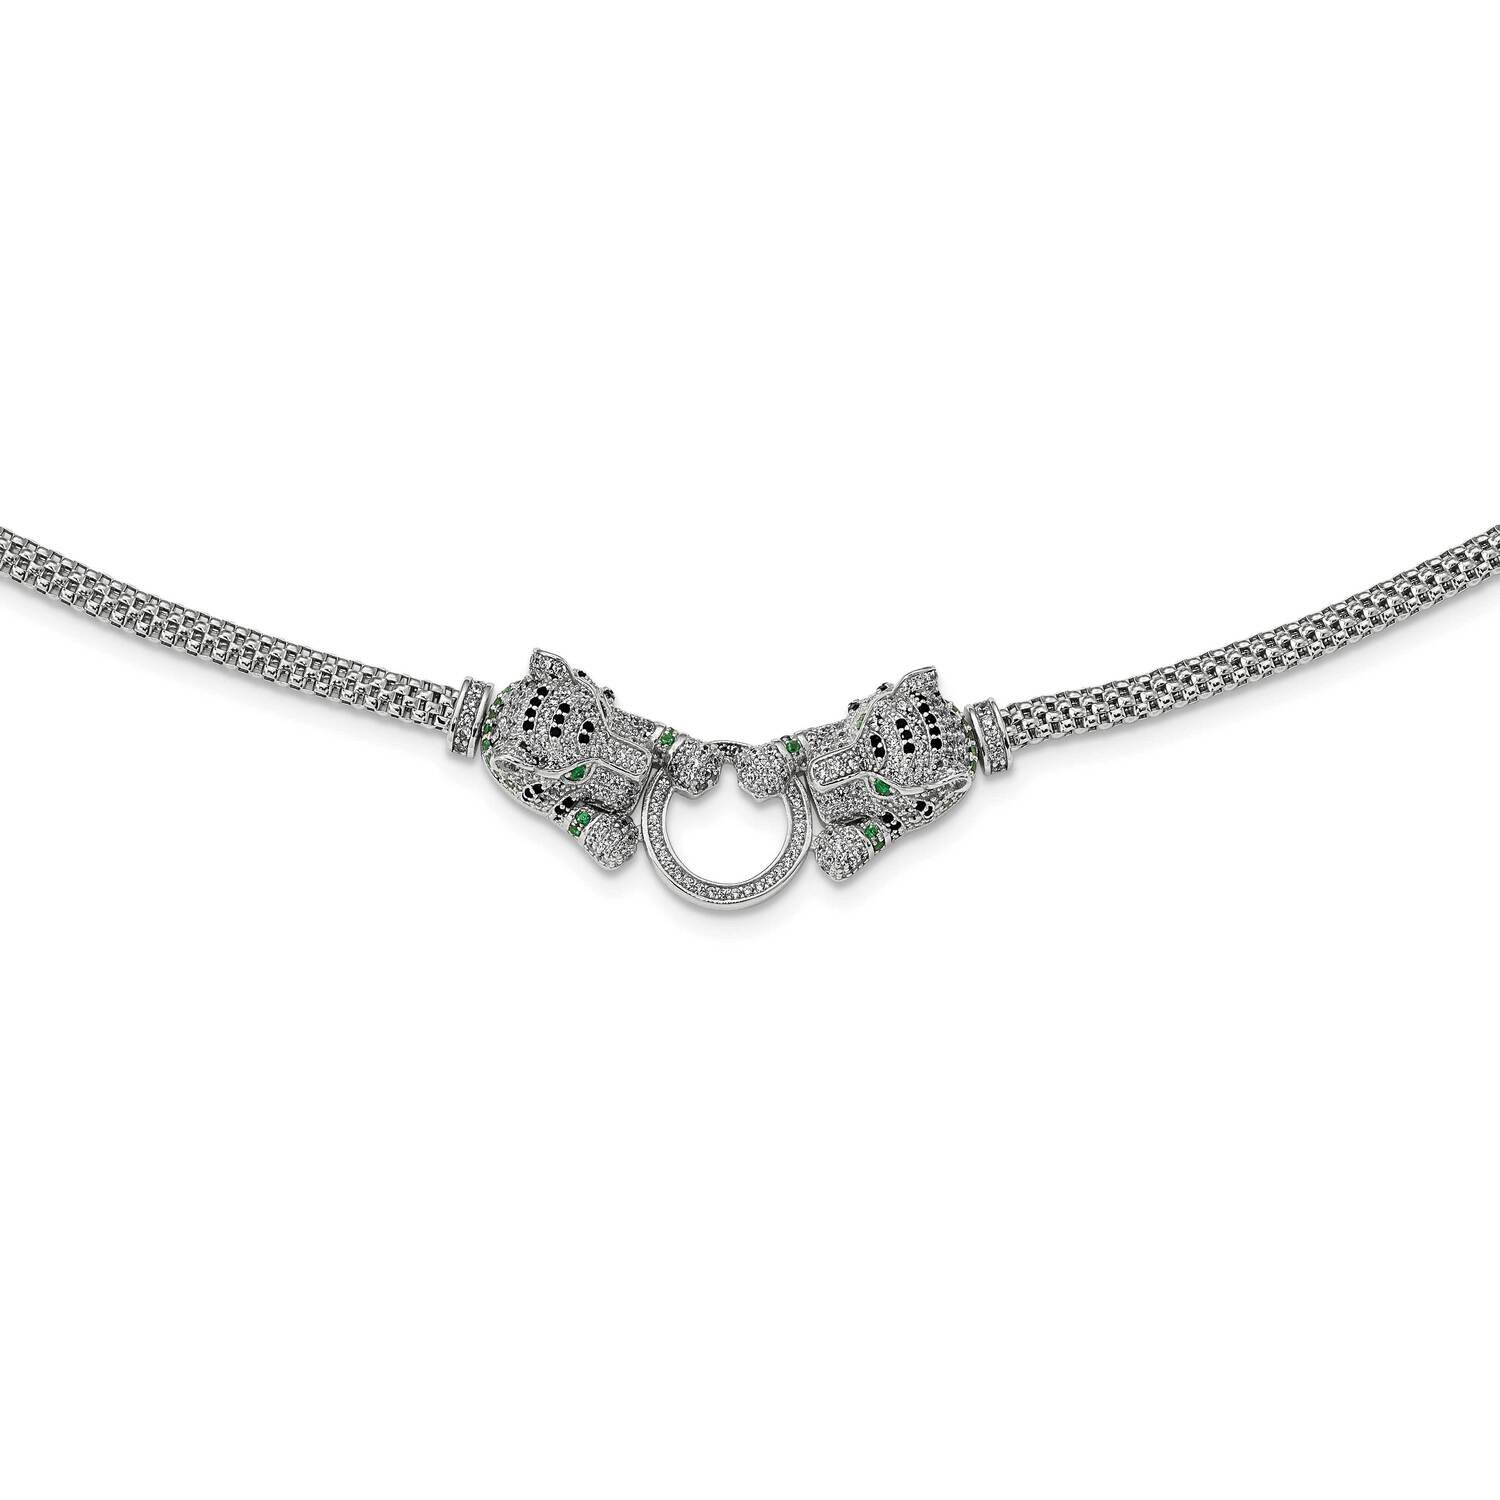 Tigers Holding Ring CZ Diamond Necklace 18 Inch Sterling Silver Rhodium-Plated Polished QG6037-18